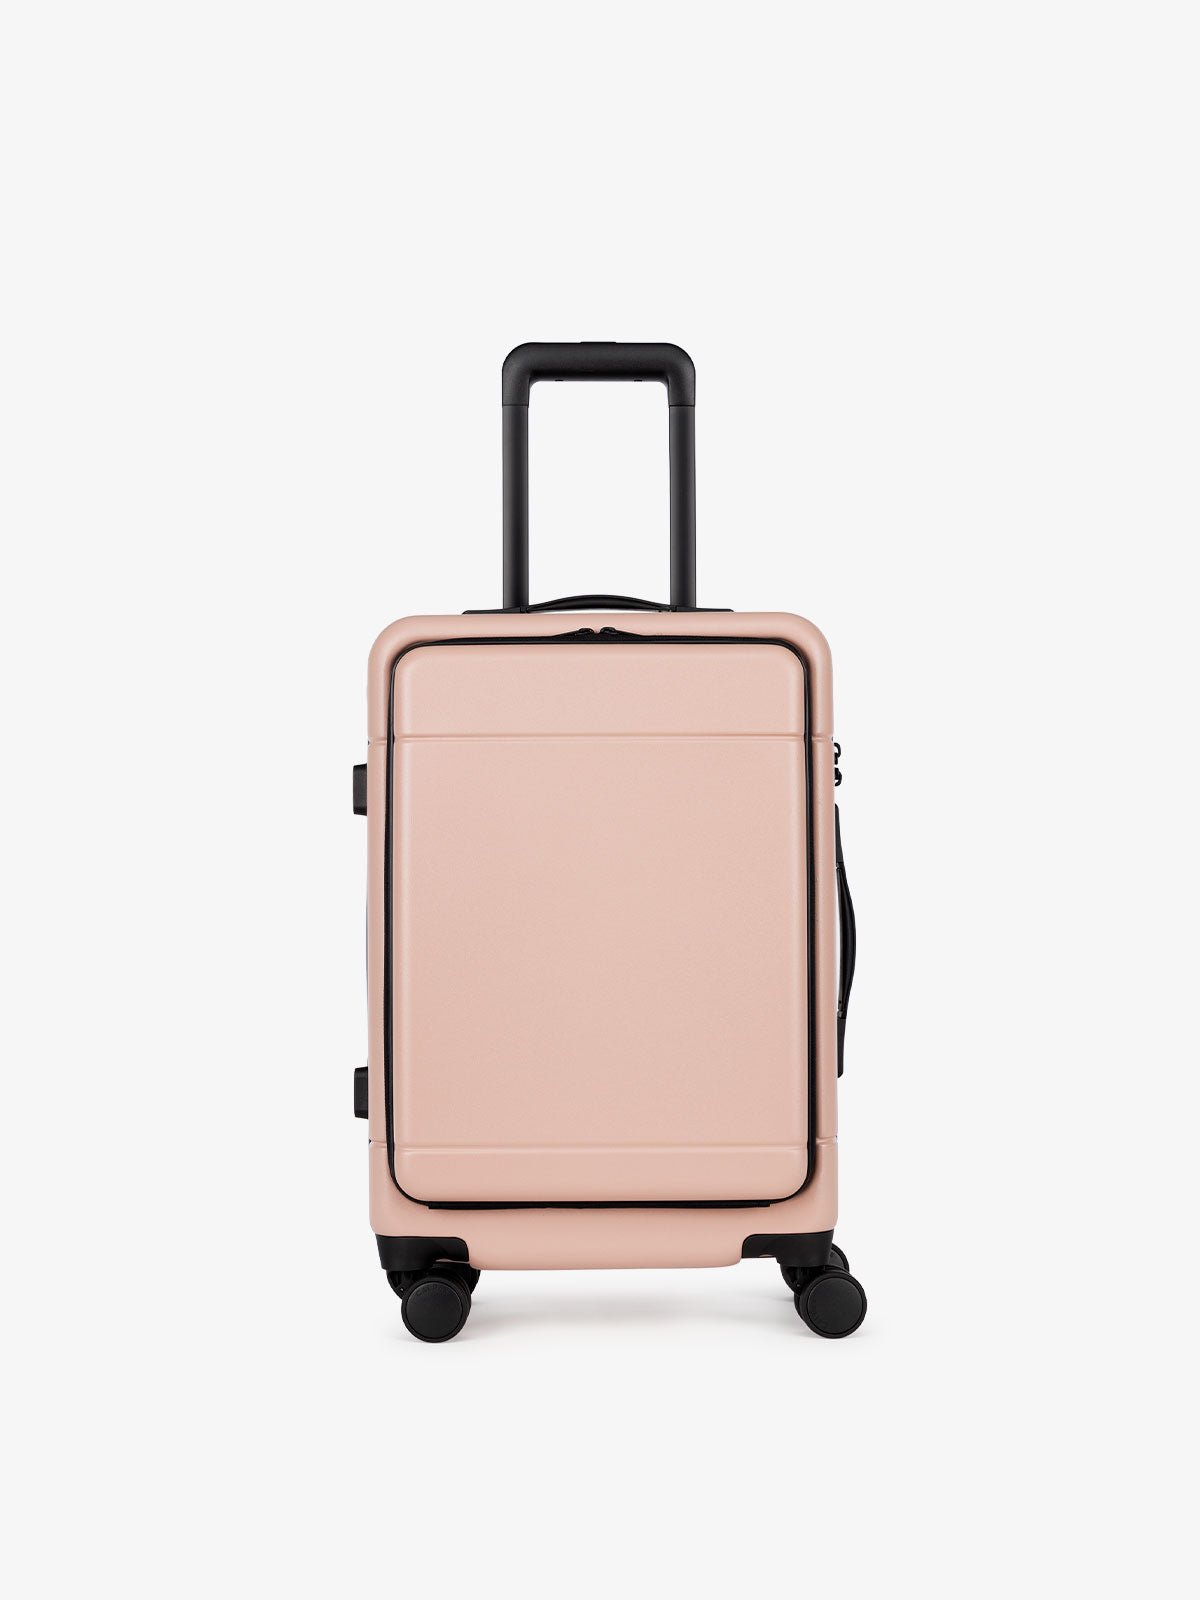 CALPAK Hue hardside carry-on suitcase with laptop compartment in pink sand color